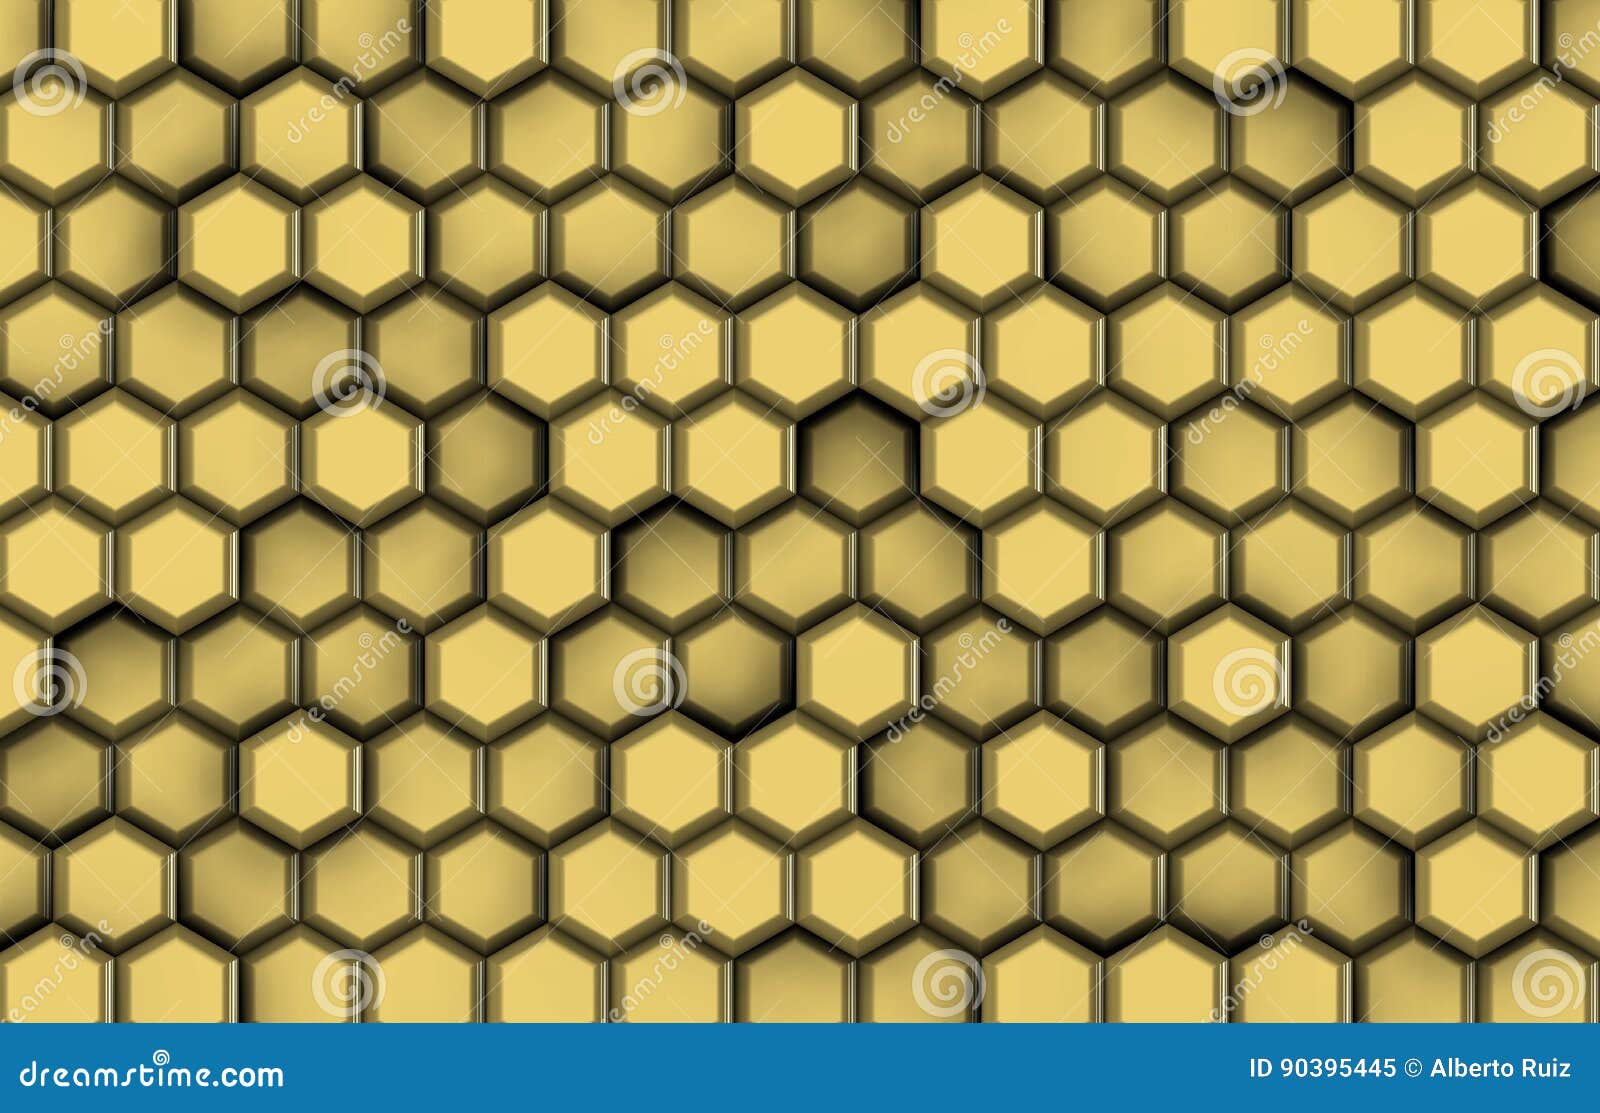 background of golden hexagons with relief and shadows,